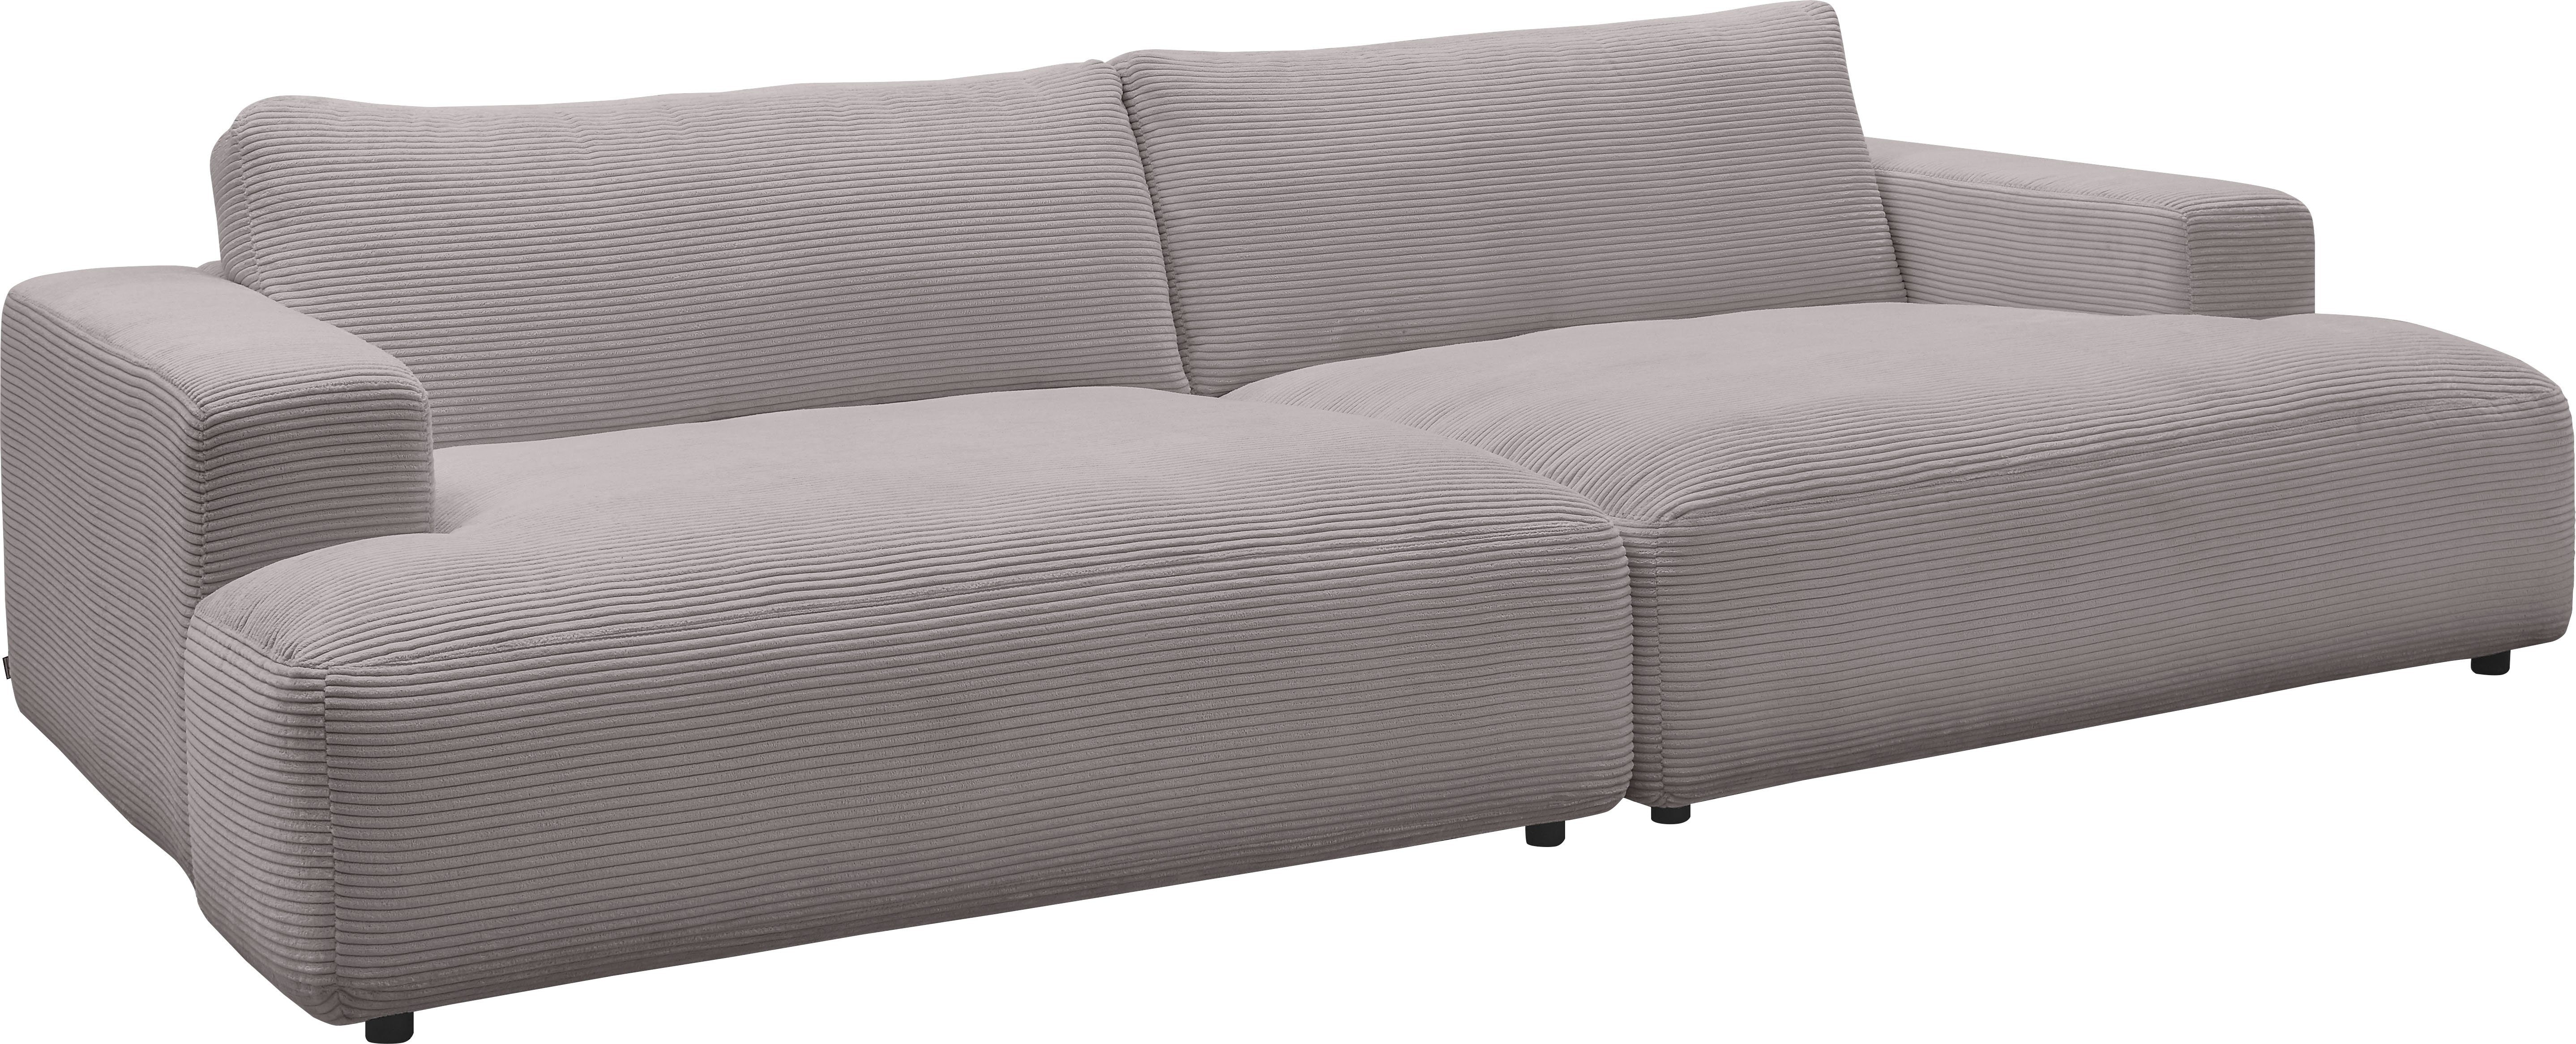 GALLERY Musterring 292 Lucia, grey Loungesofa Cord-Bezug, by cm M Breite branded